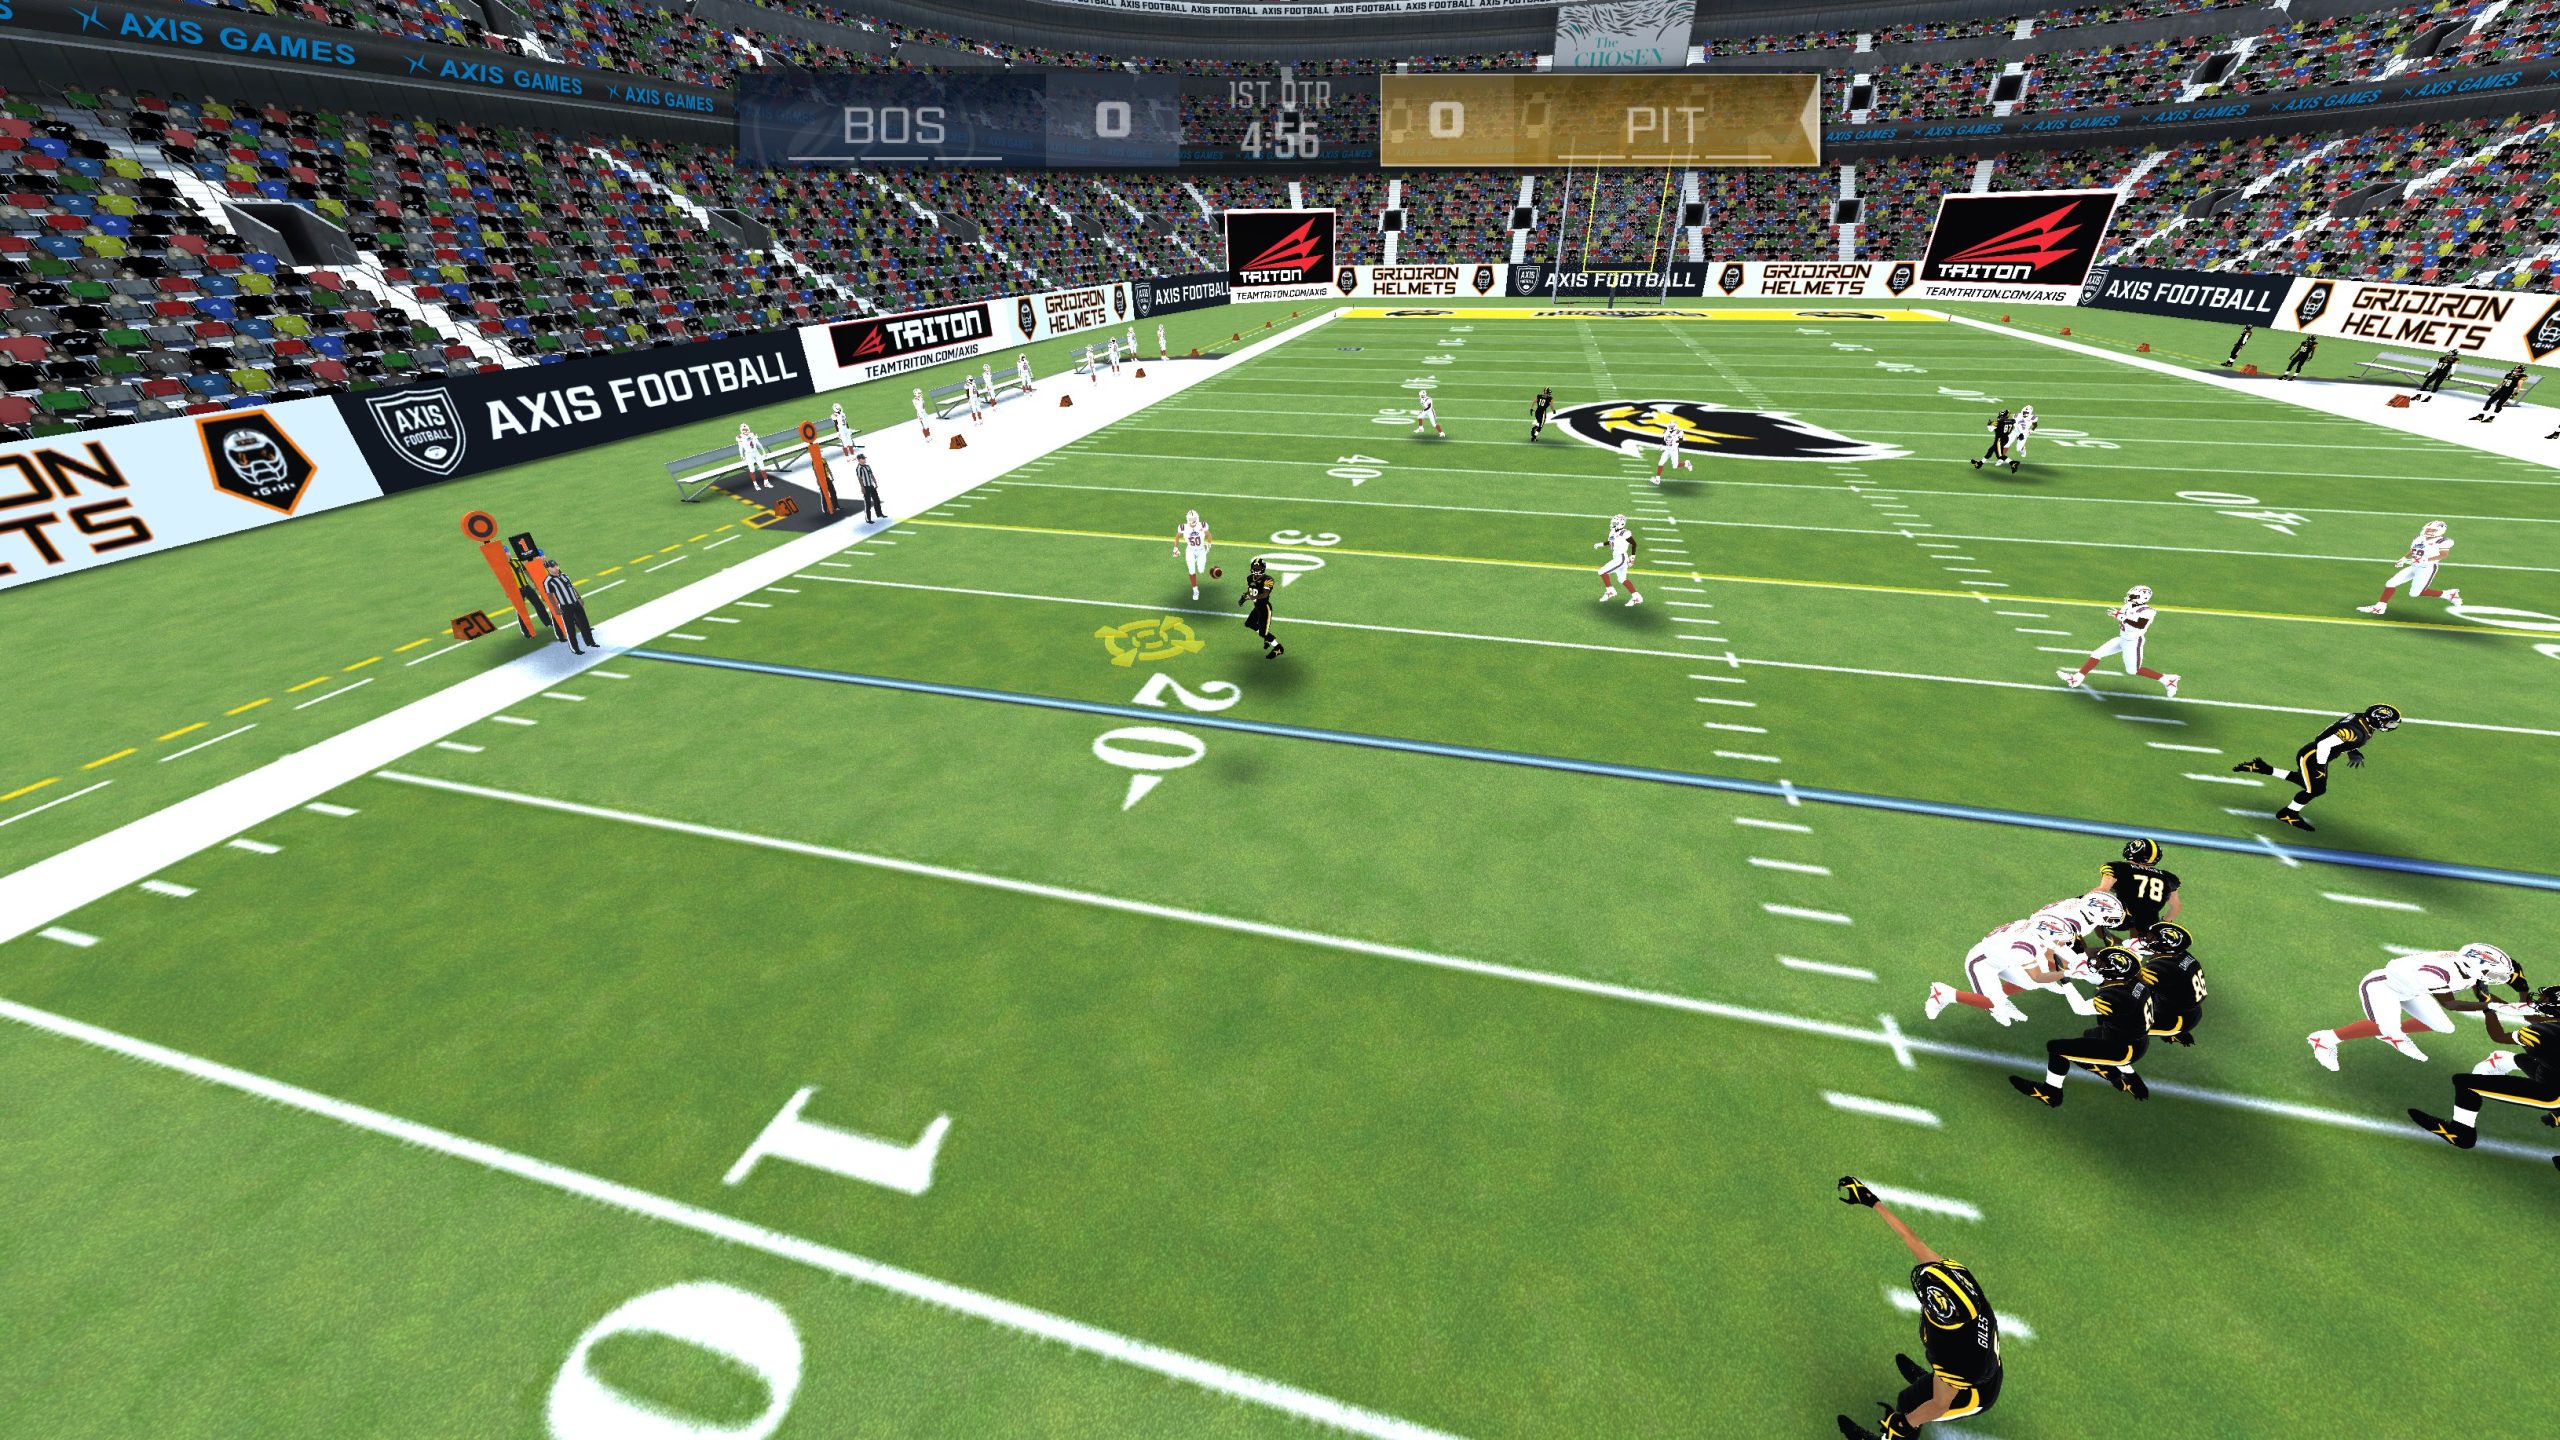 Take a punt with Axis Football 2023 on Xbox TheXboxHub